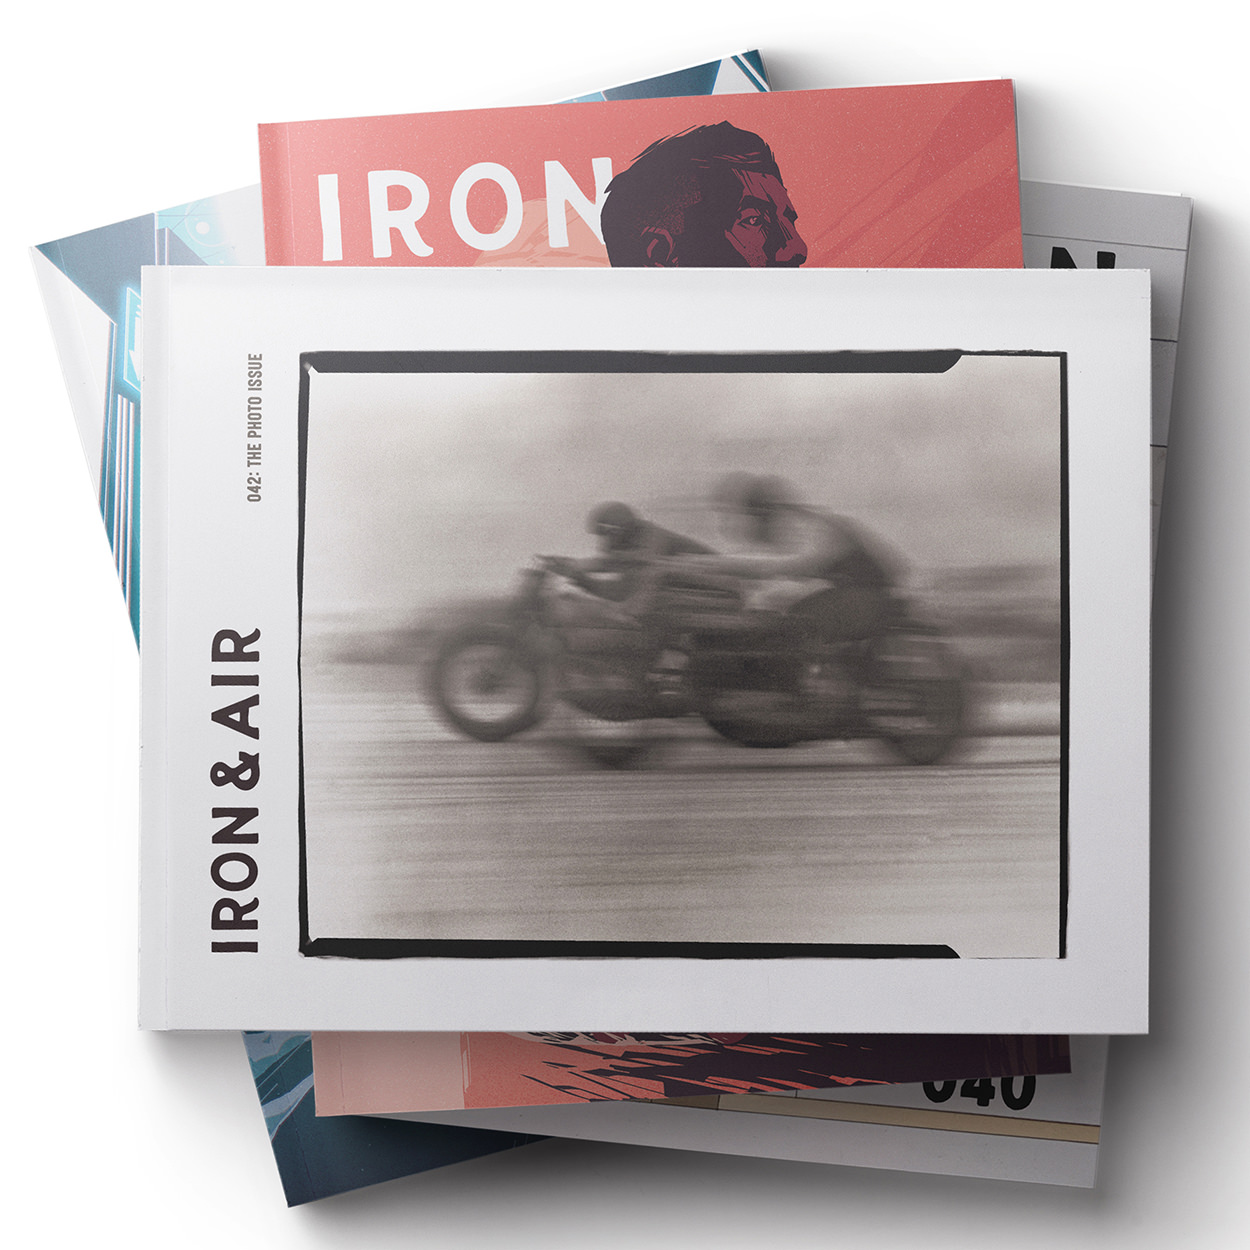 Iron & Air: The Photo Issue is out